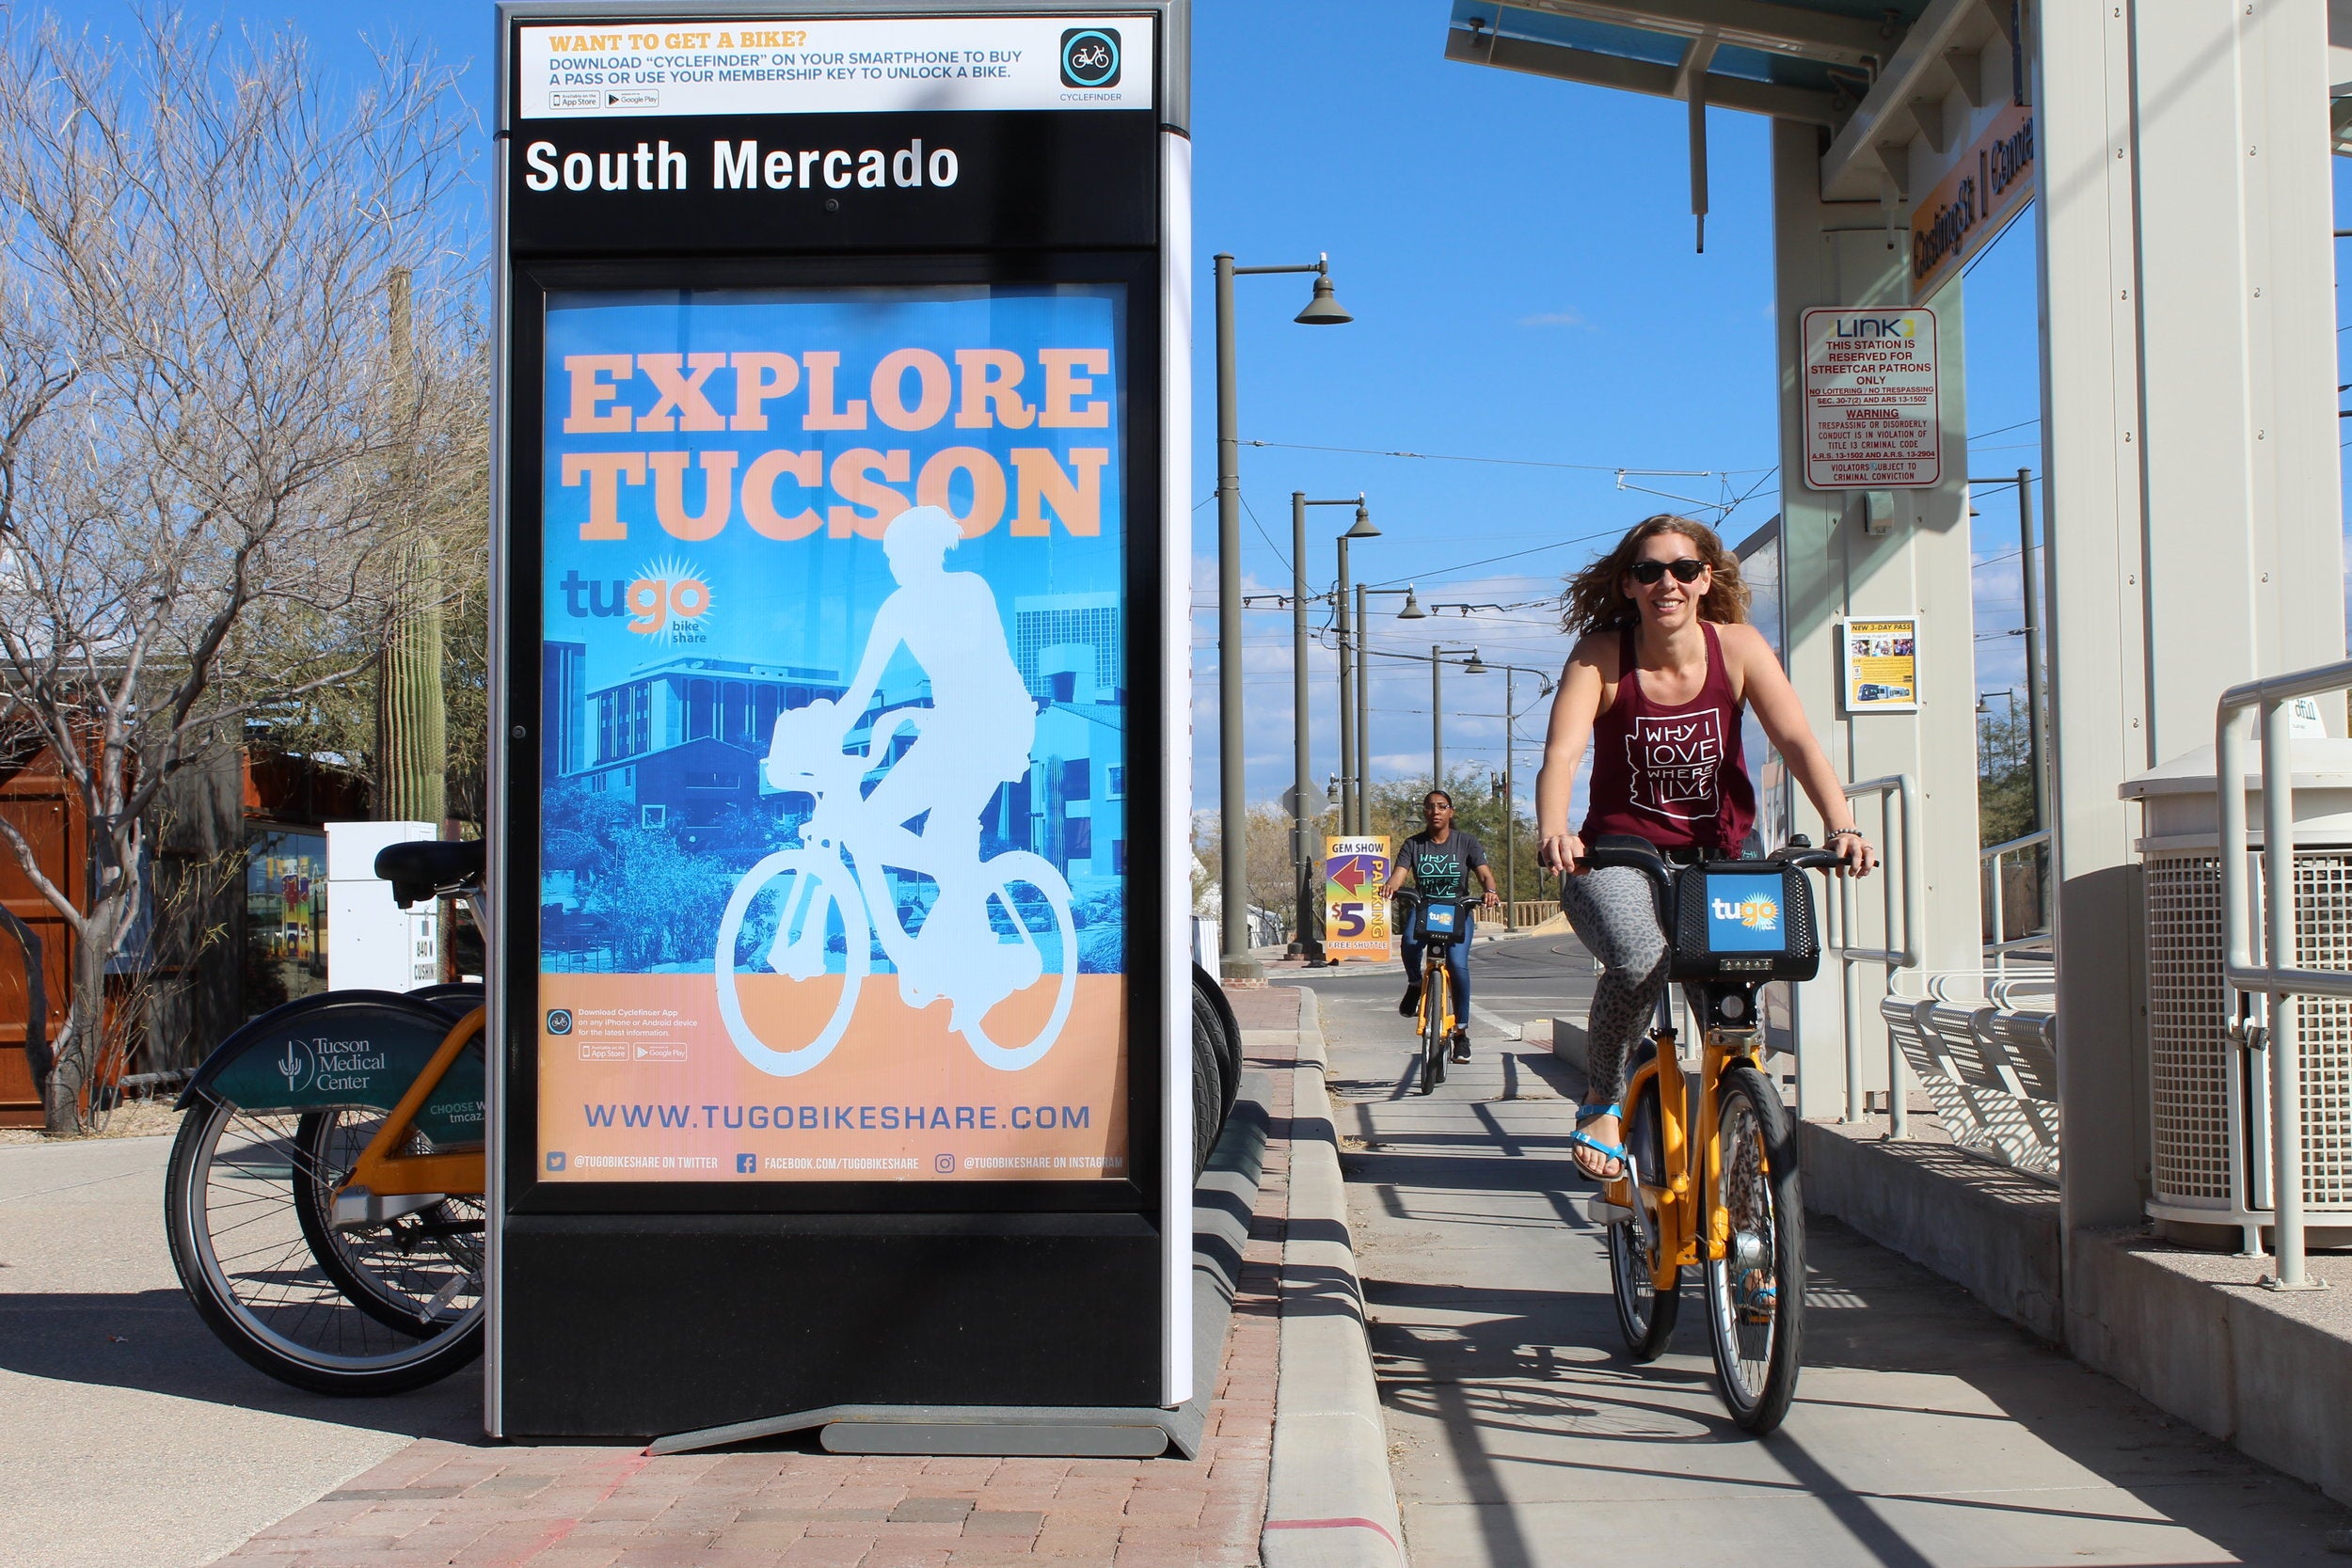 Tugo Bike Share: Imagining a Better City Through the Lens of Two Wheels